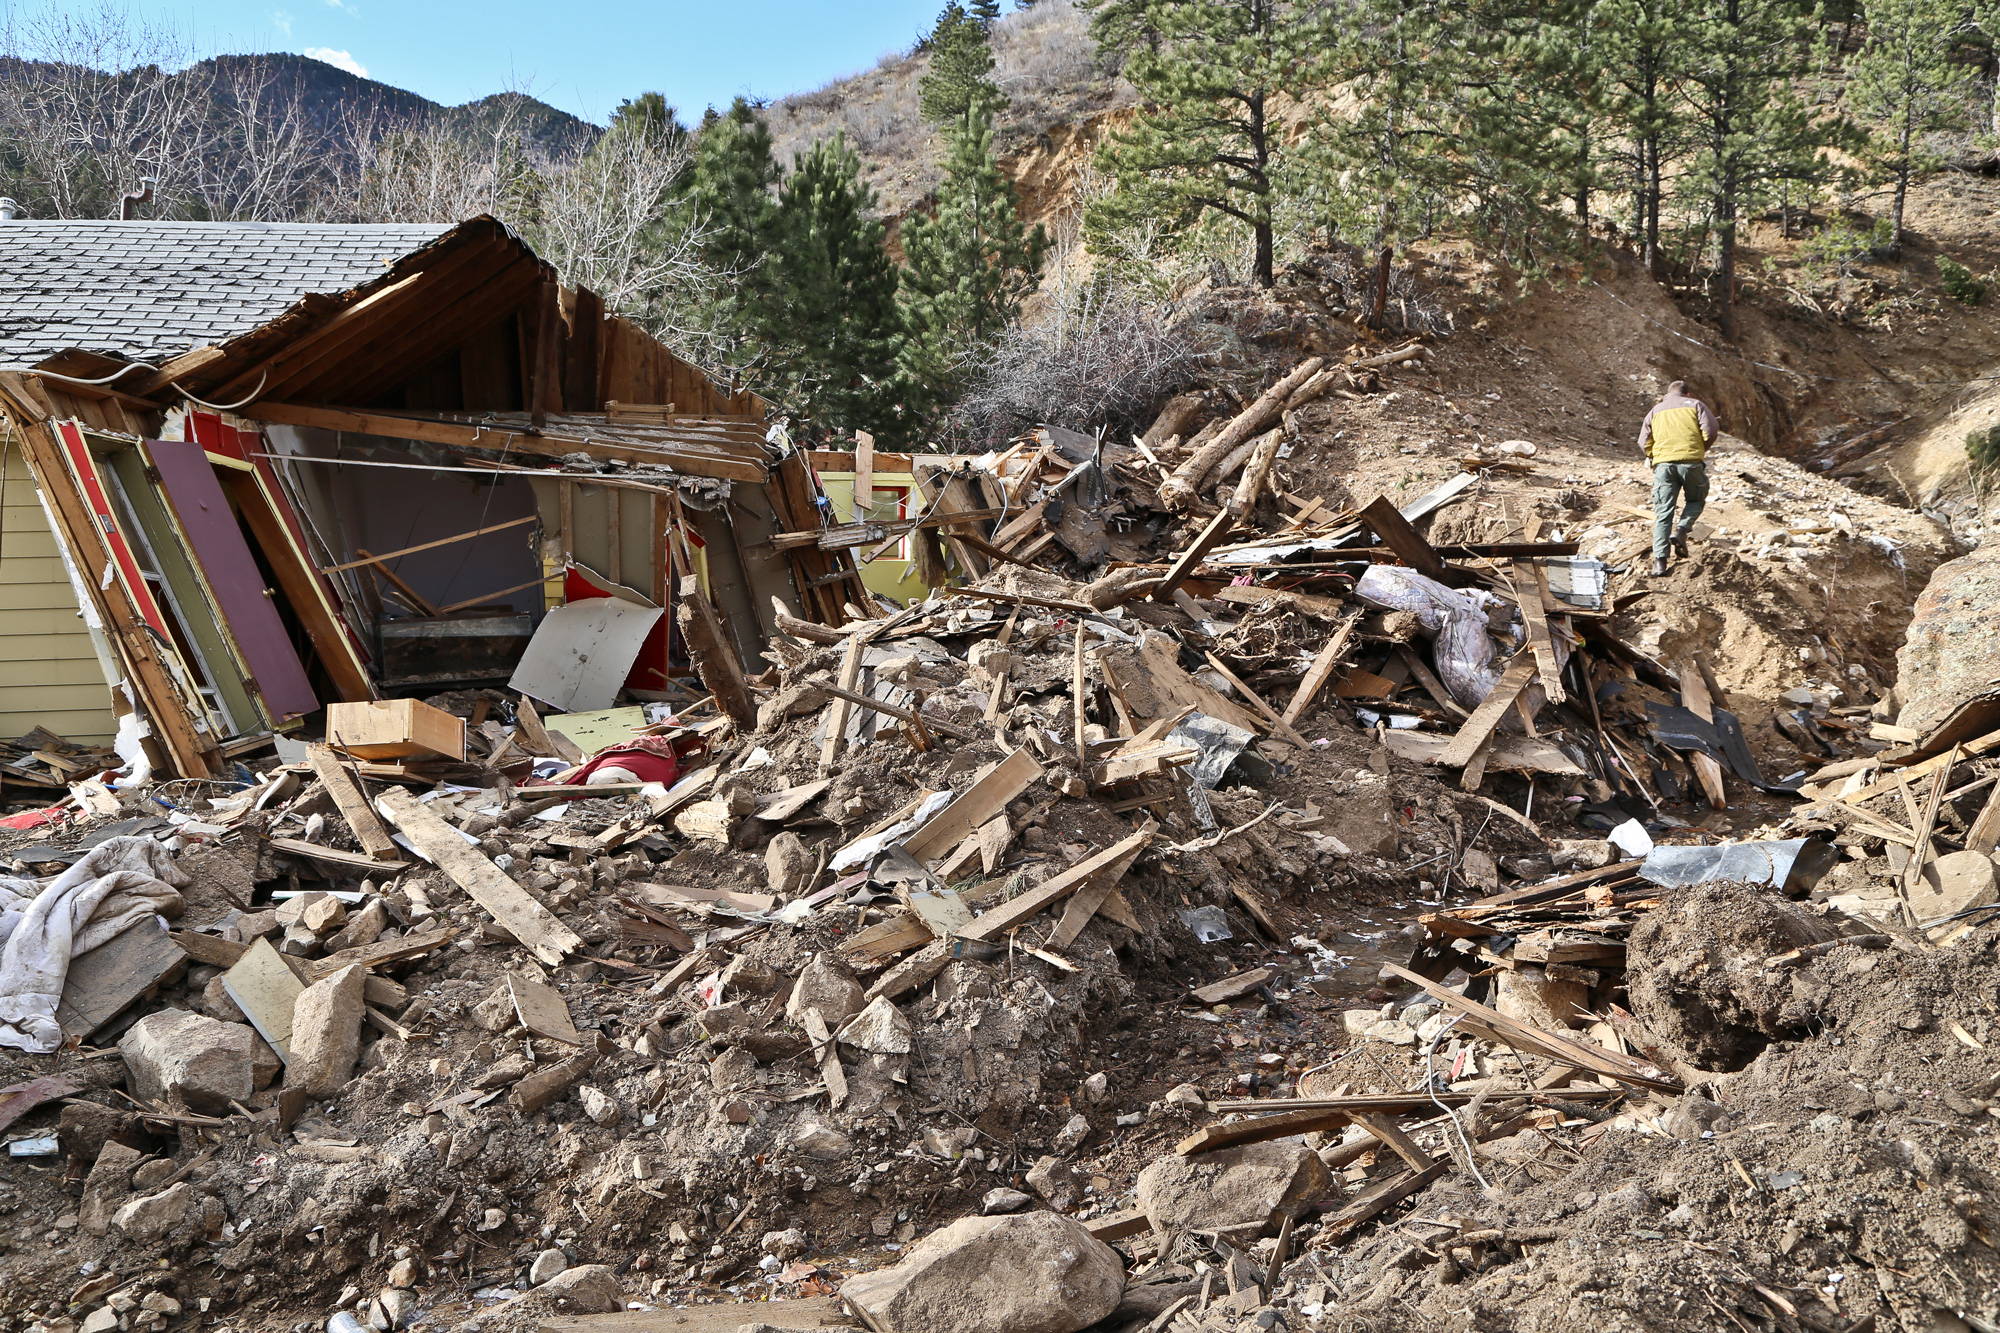 House destroyed by debris flow, after the “1,000-year rain event” in September near Jamestown, Colorado, November 2013. Photo credit: Jon White for the CGS.